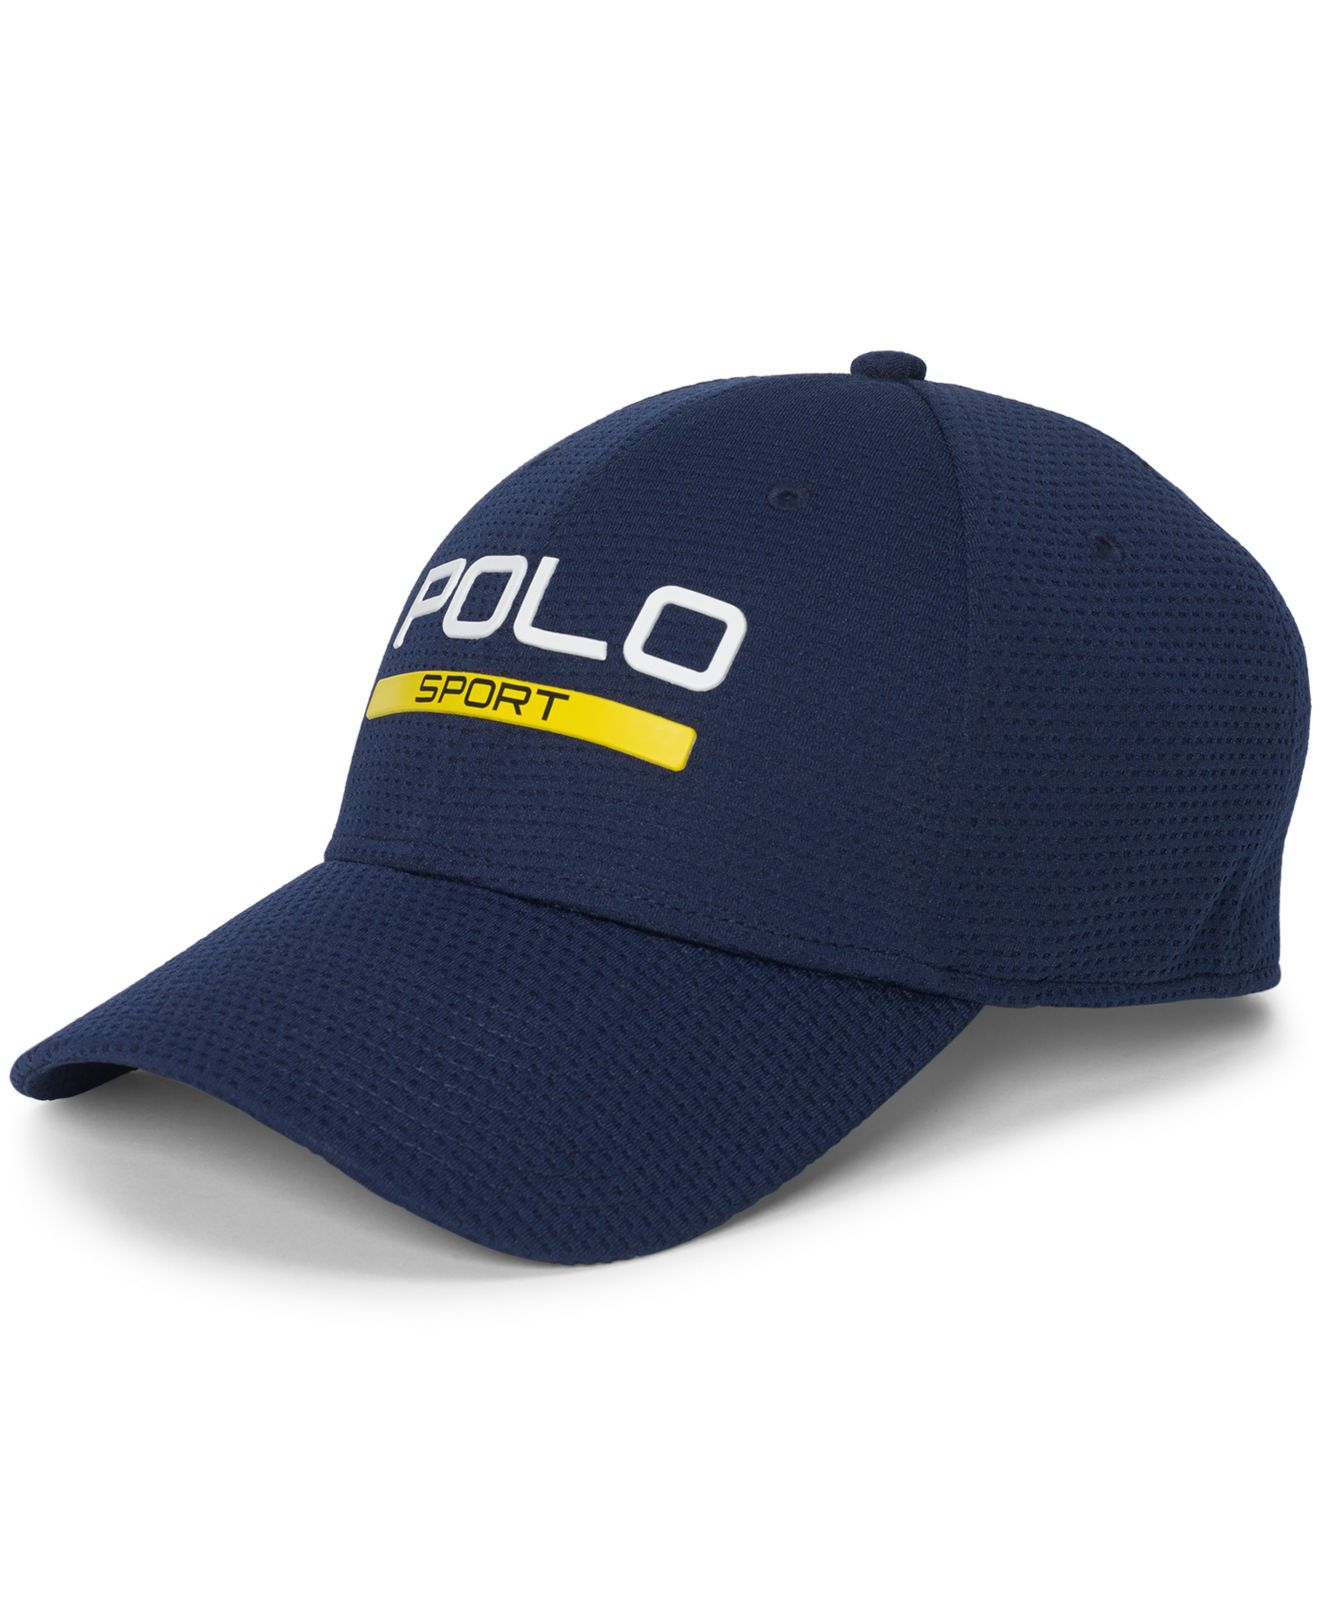 Polo Ralph Lauren Polo Sport Men's Stretch-fit Performance Hat in